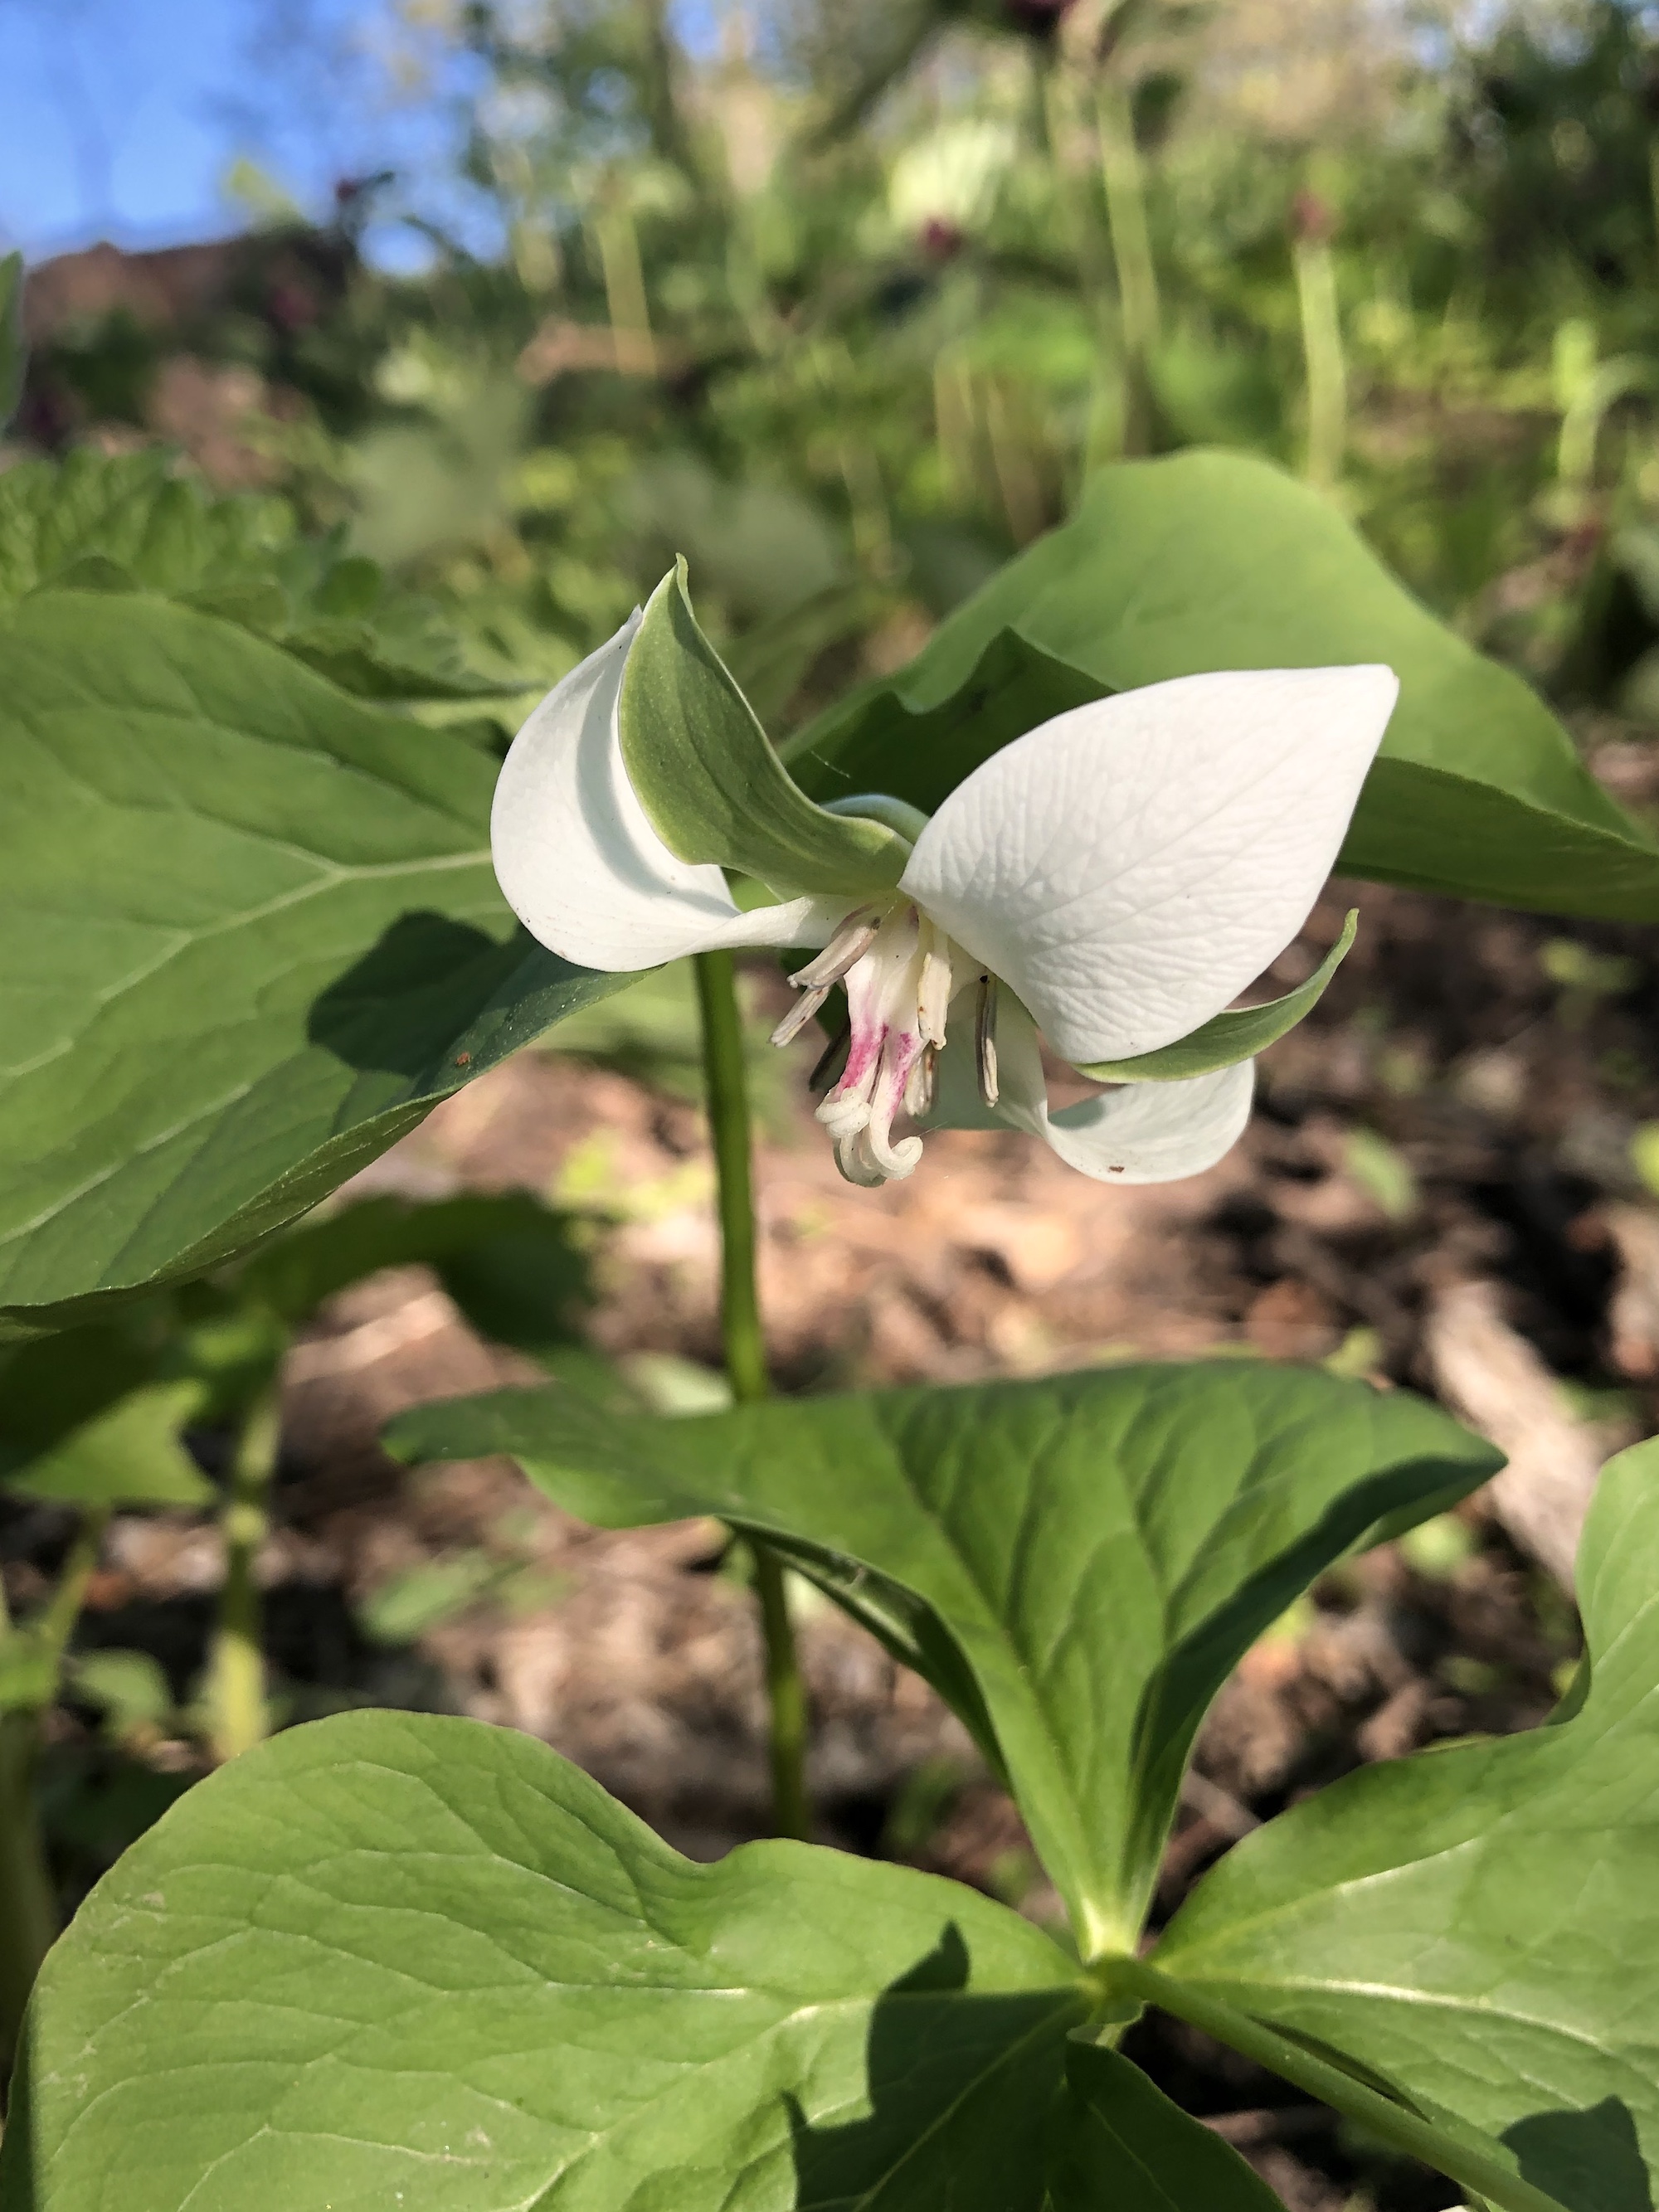 Drooping Trillium near Council Ring Spring in Madison, Wisconsin on May 11, 2021.